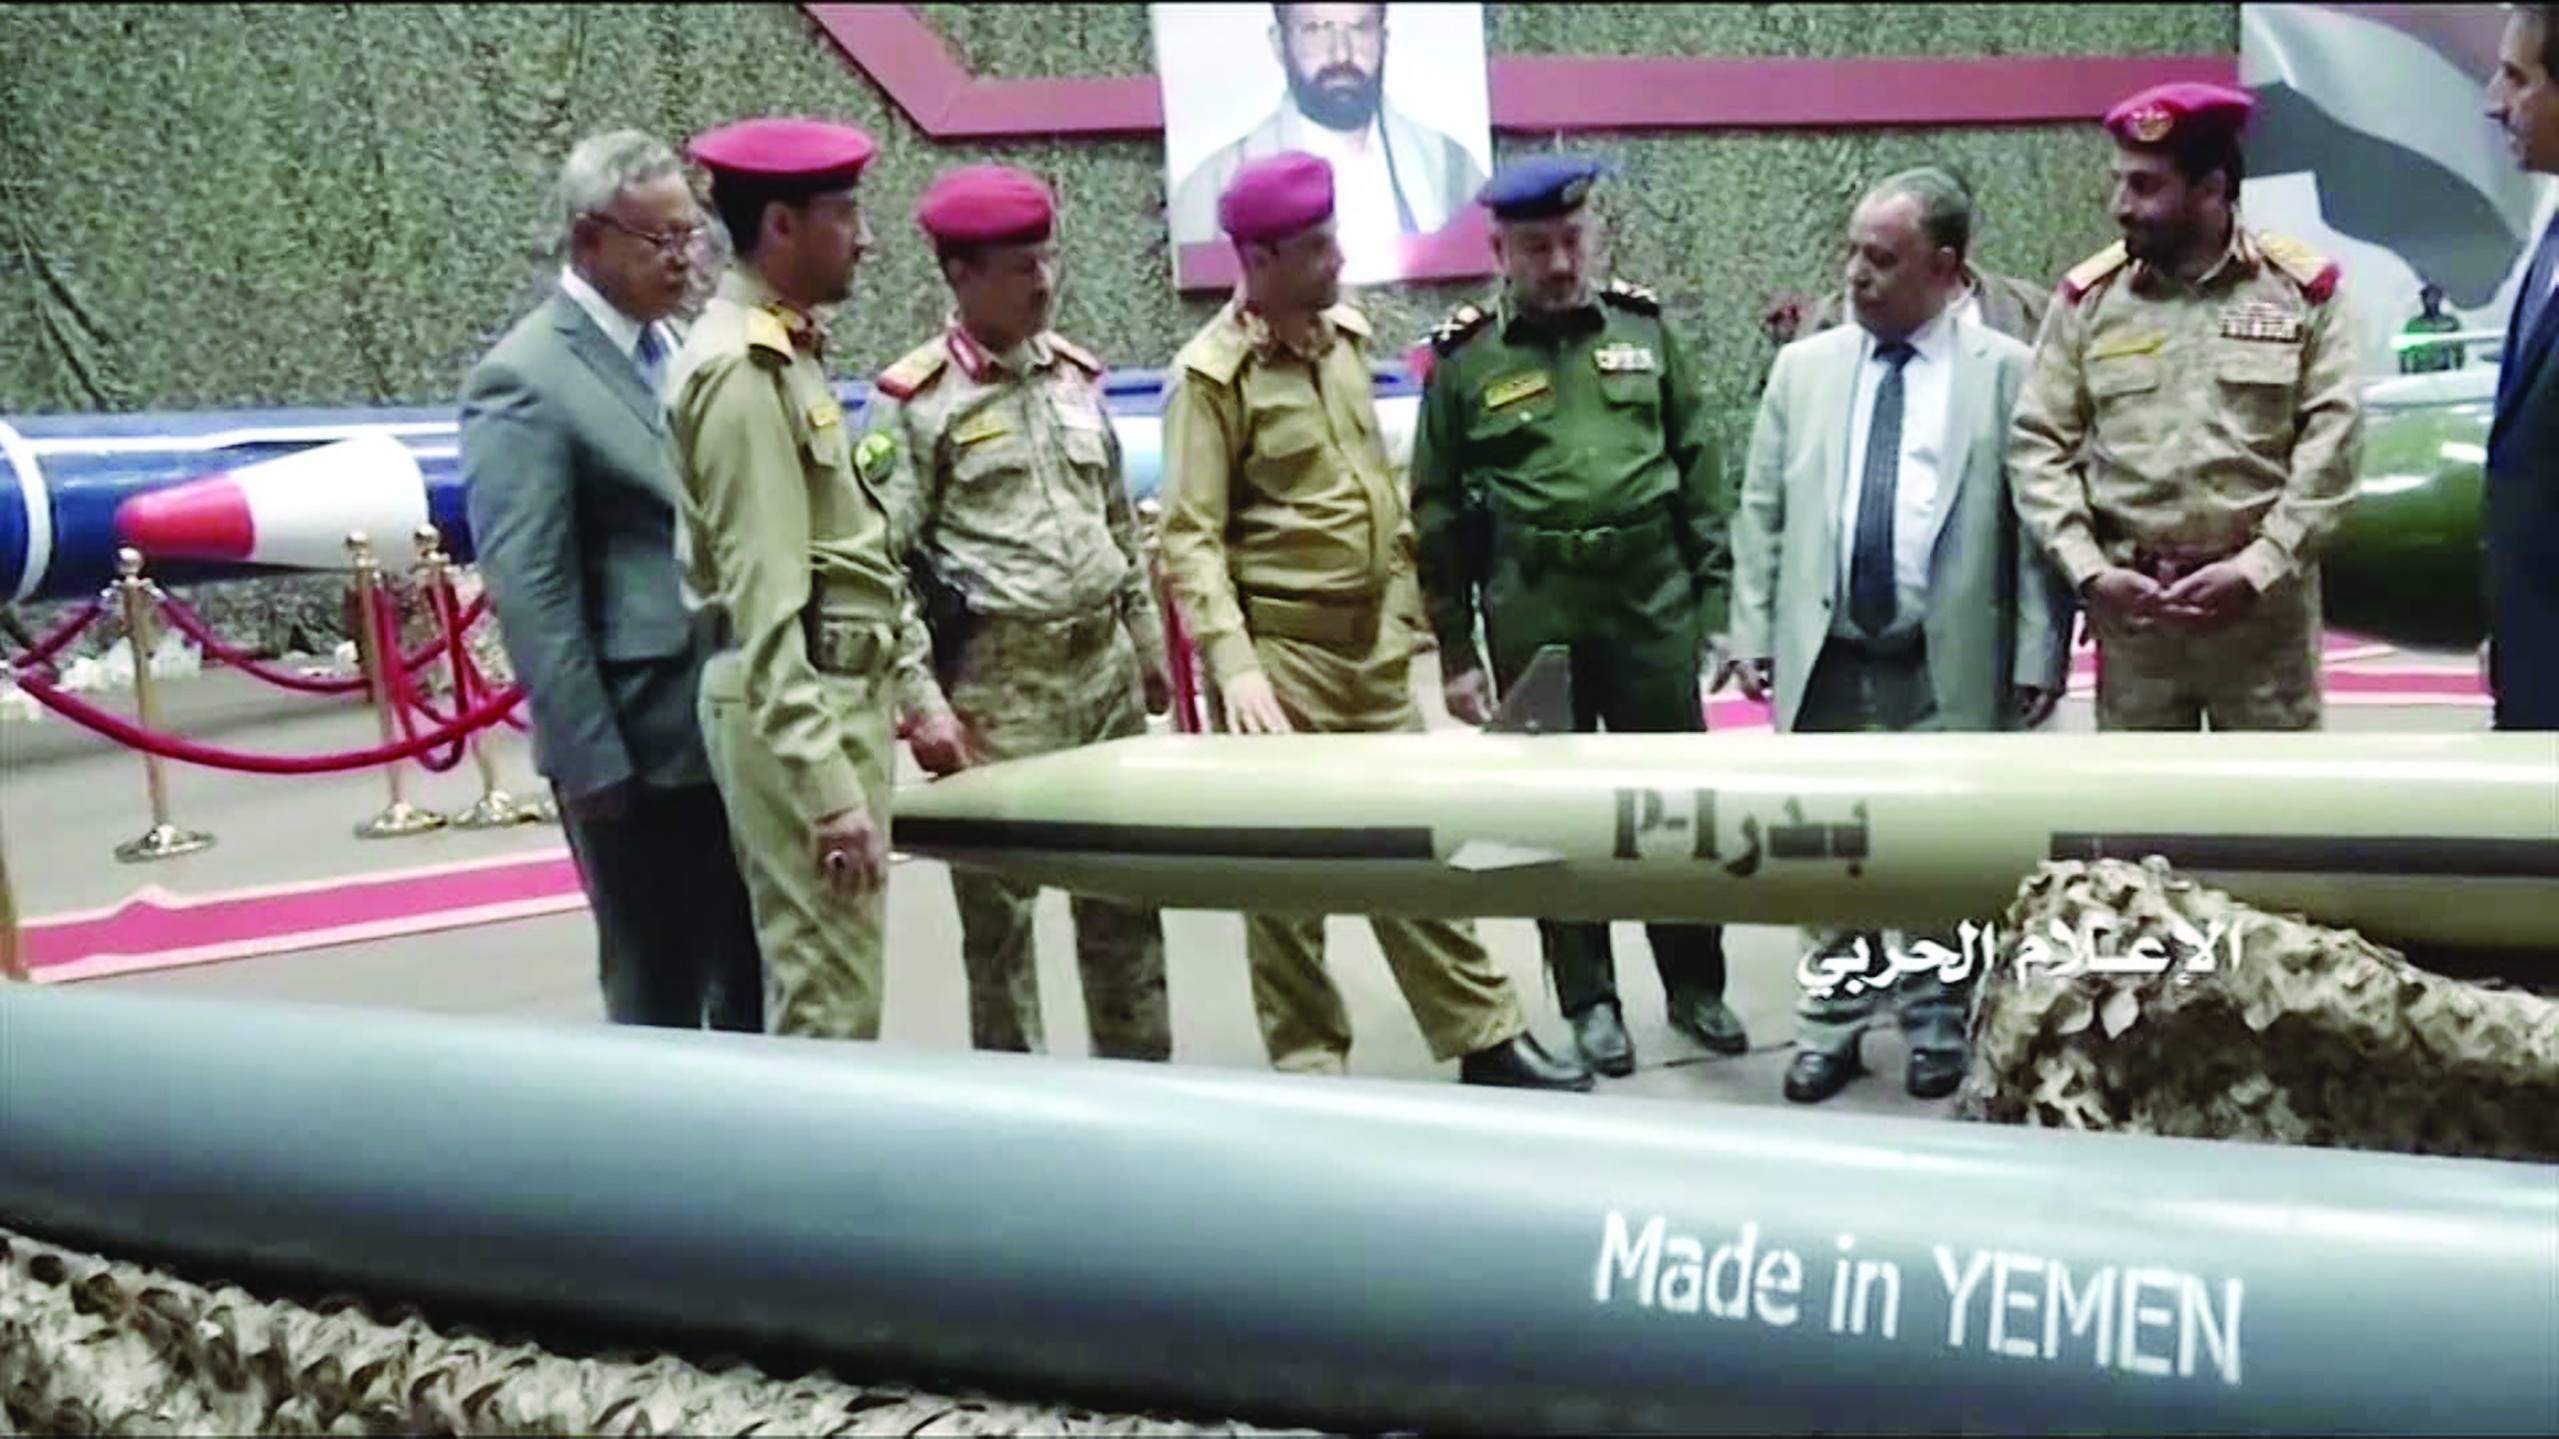 (FILES) In this file image grab taken on July 23, 2019 by the press office of the Yemeni Shiite Huthi group shows ballistic missiles, bearing Made in Yemen, on display during a recent exhibition of various missiles and unmanned aerial vehicles at an undisclosed location in Yemen. - Claims that Yemeni rebels shot down a Saudi warplane have spotlighted the increasingly potent Huthi arsenal -- cause for alarm in Riyadh as fighting escalates amid faltering efforts to end the five-year conflict. The Iran-aligned Huthi rebels said they downed the Tornado aircraft on February 14, 2020 over the volatile northern province of Al-Jawf, in a setback for the Riyadh-led military coalition that has always enjoyed air supremacy in the conflict. (Photo by - / Al-Huthi Group Media Office / AFP)